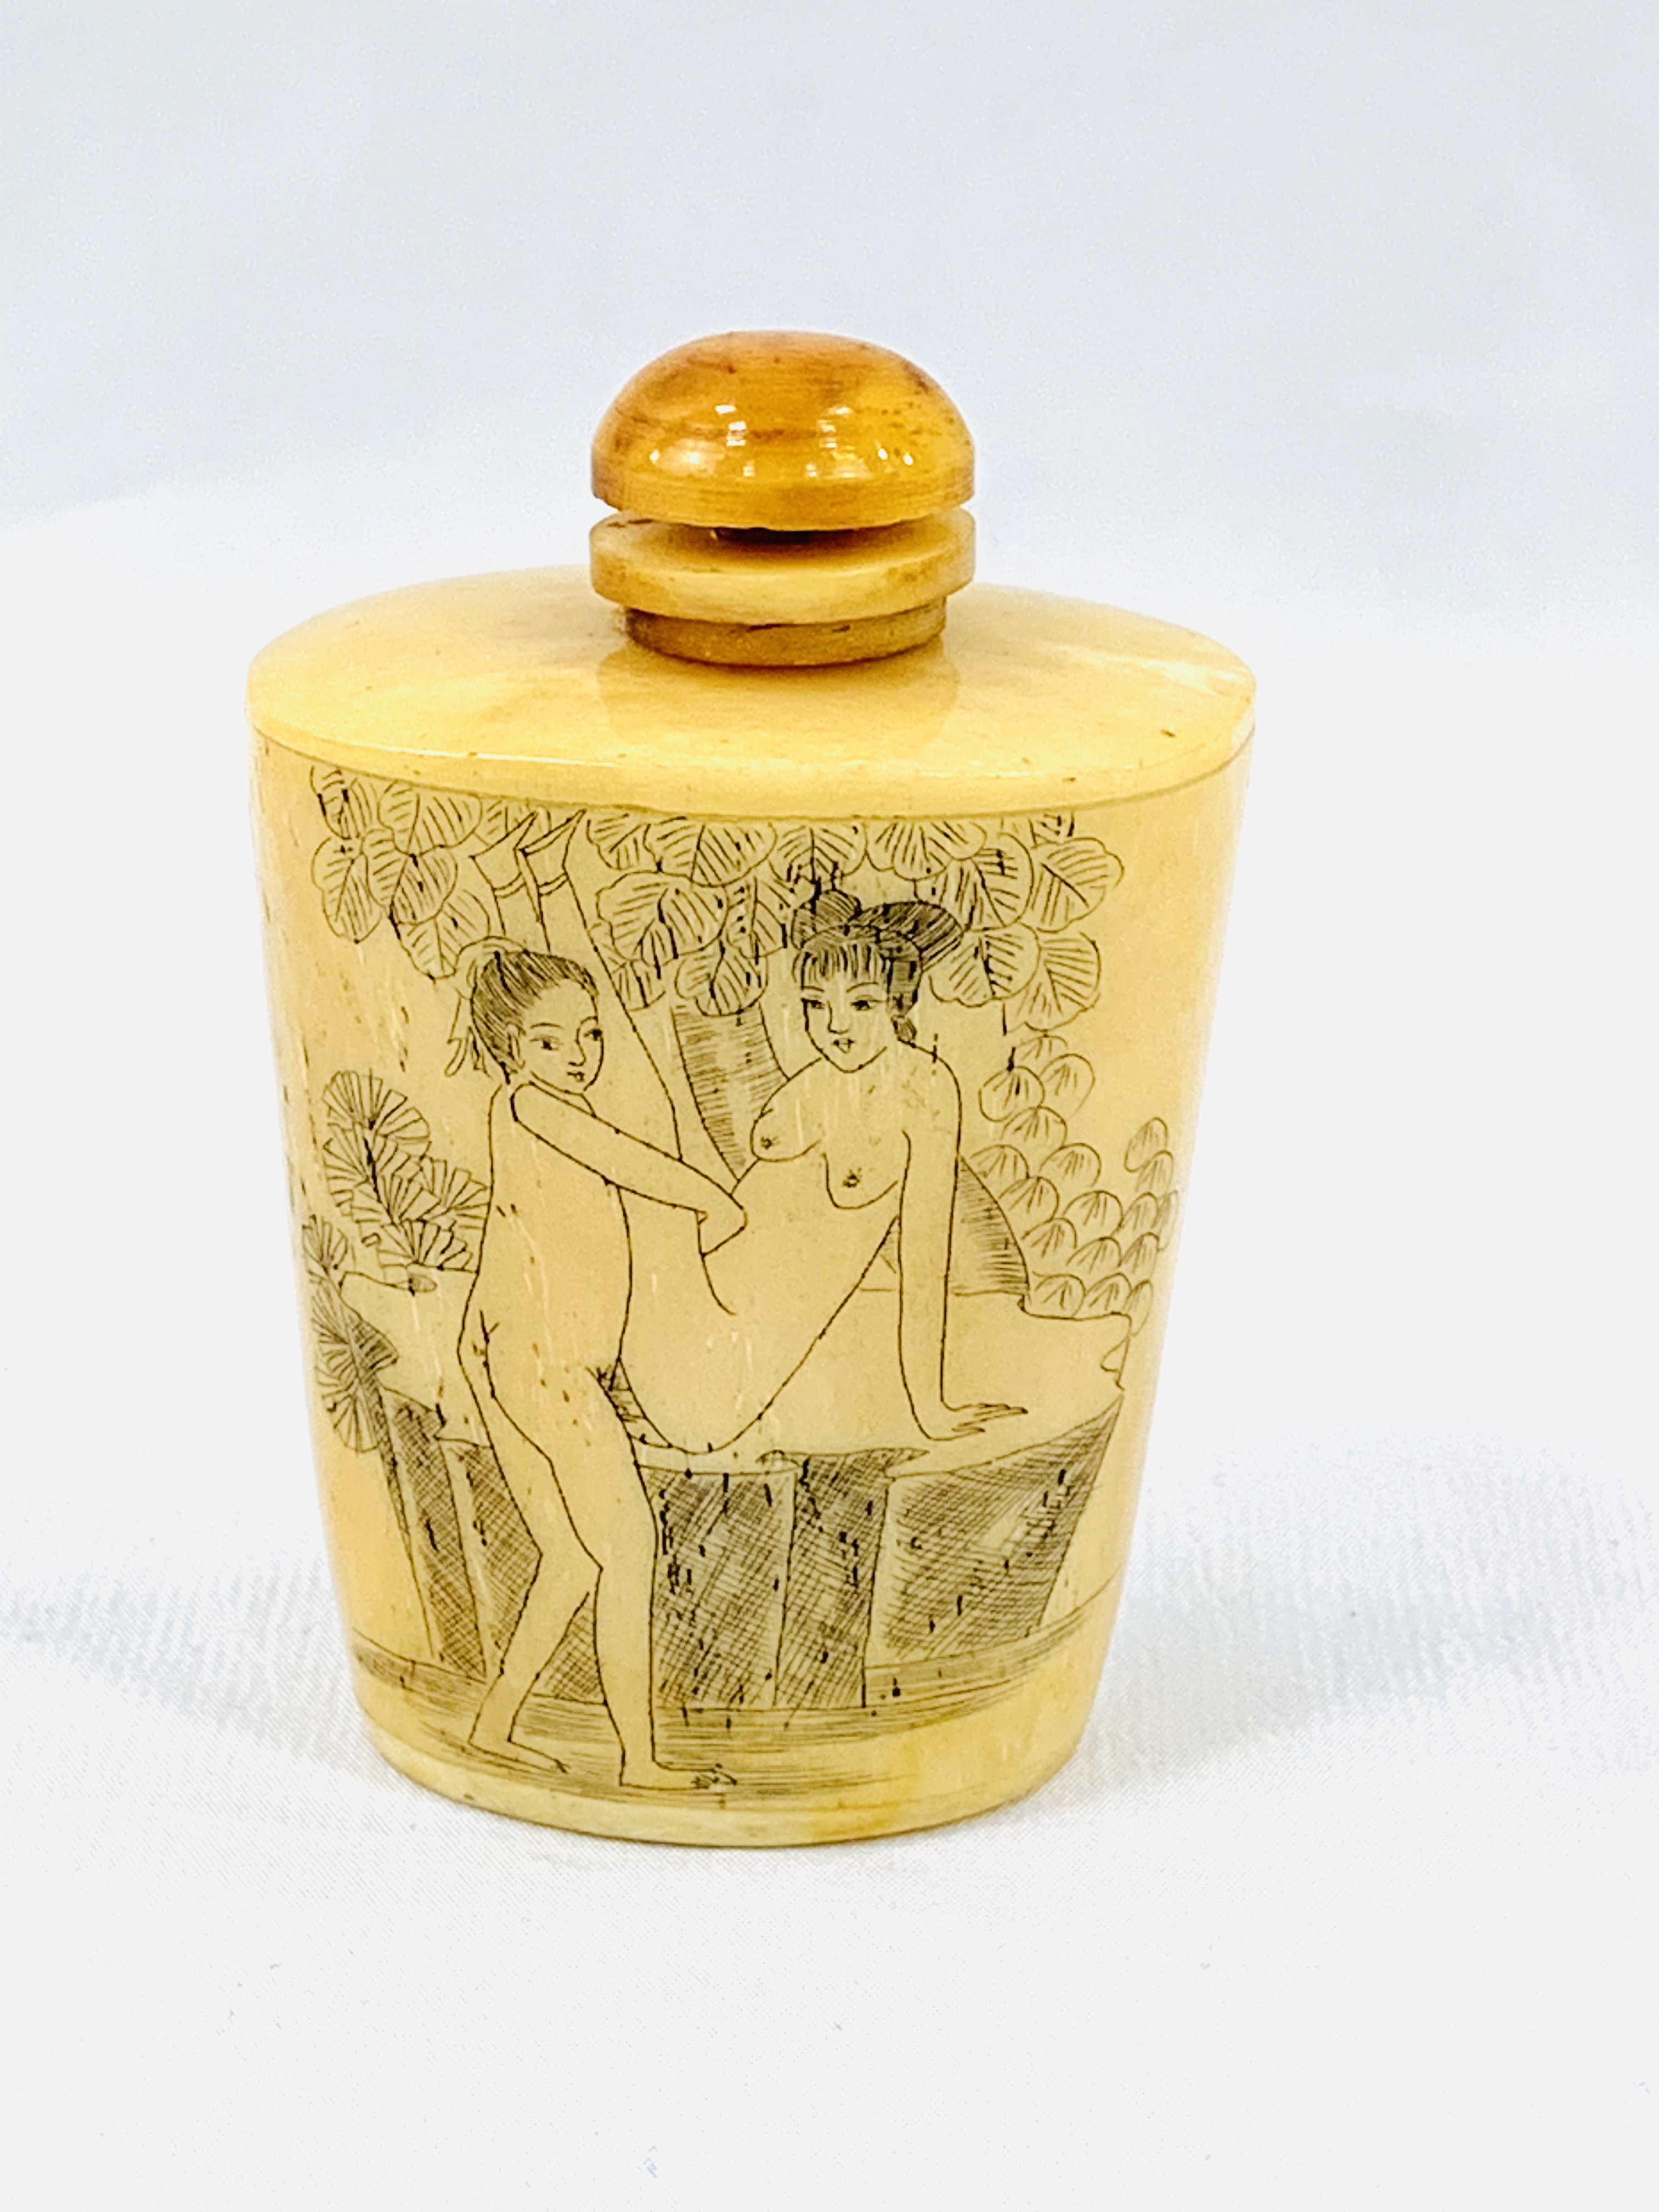 Cone shaped Chinese snuff bottle with dipper, featuring an erotic scene. - Image 2 of 2